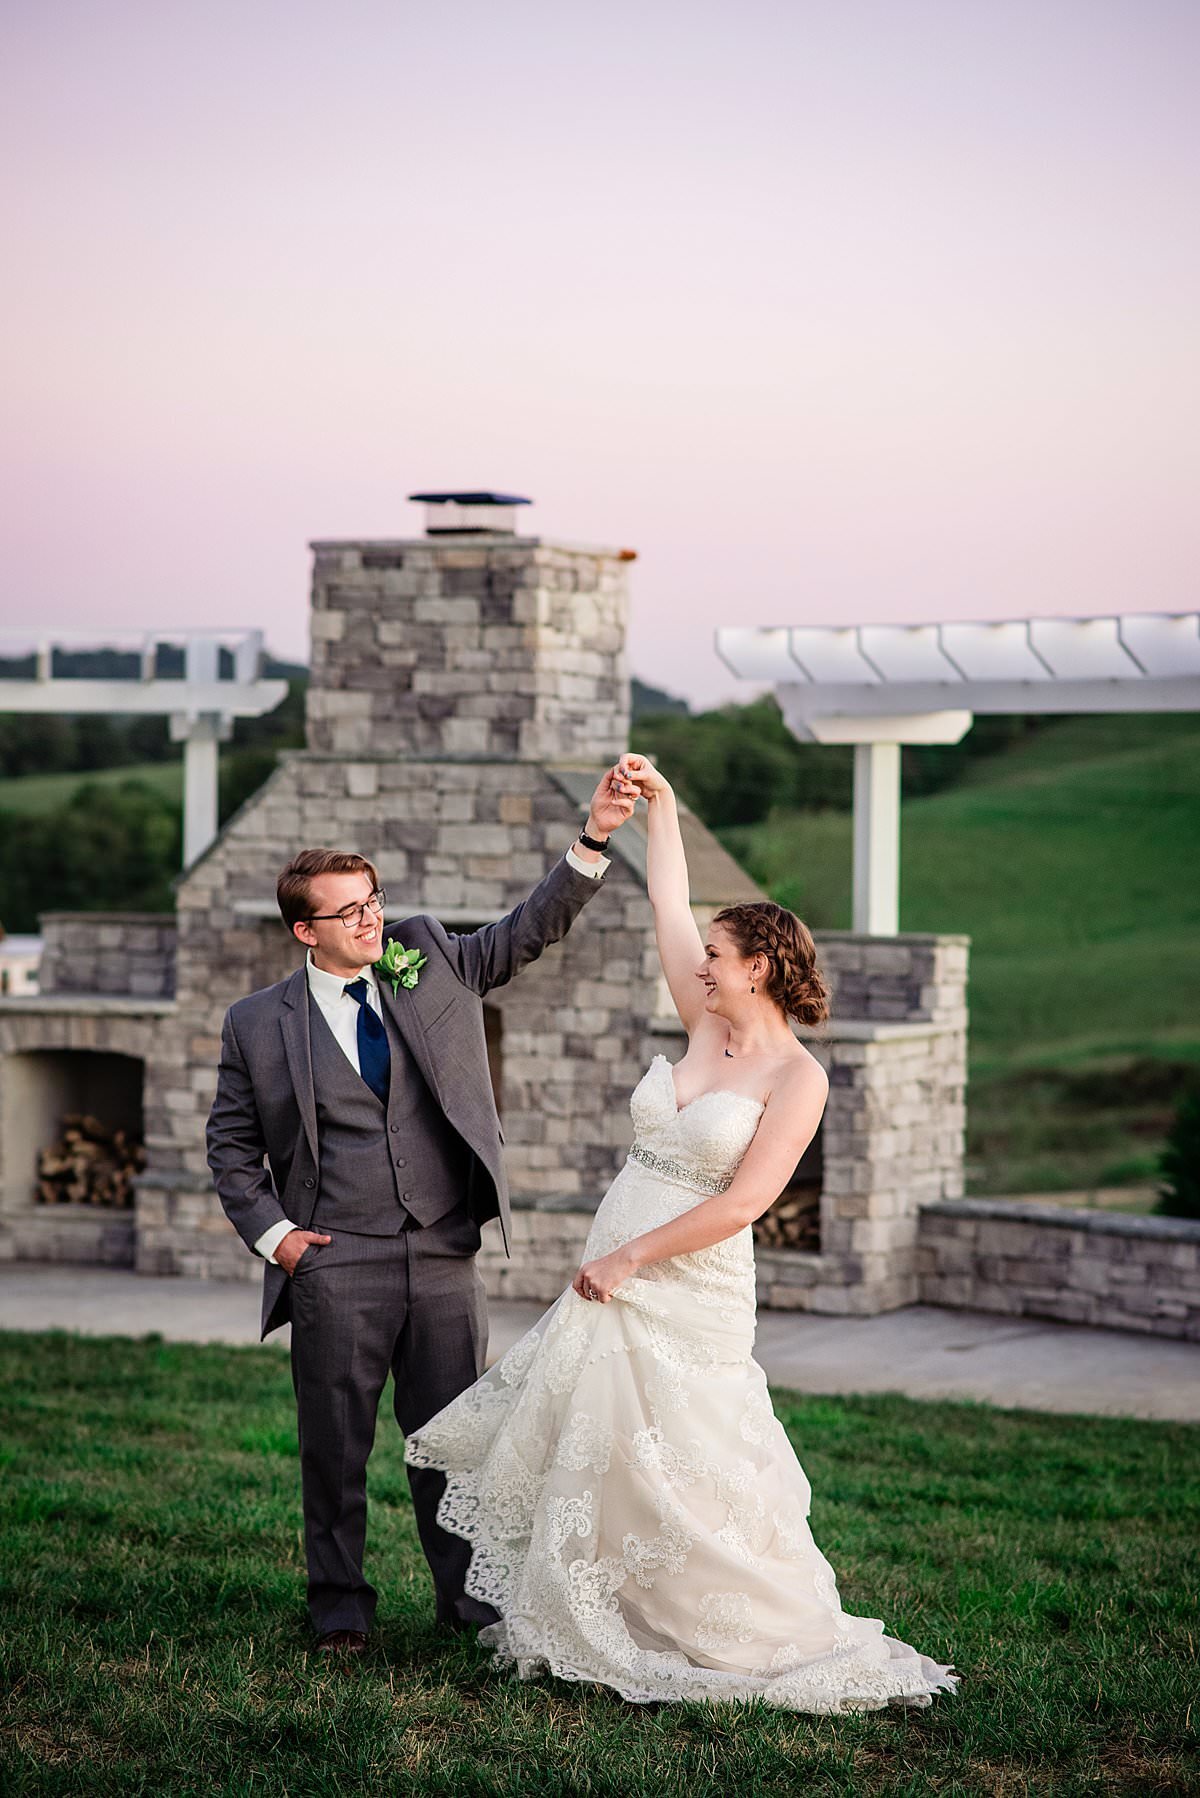 Groom holding his wife's hand as she twirls in her wedding dress in front of the outdoor stone fireplace at White Dove Barn during sunset